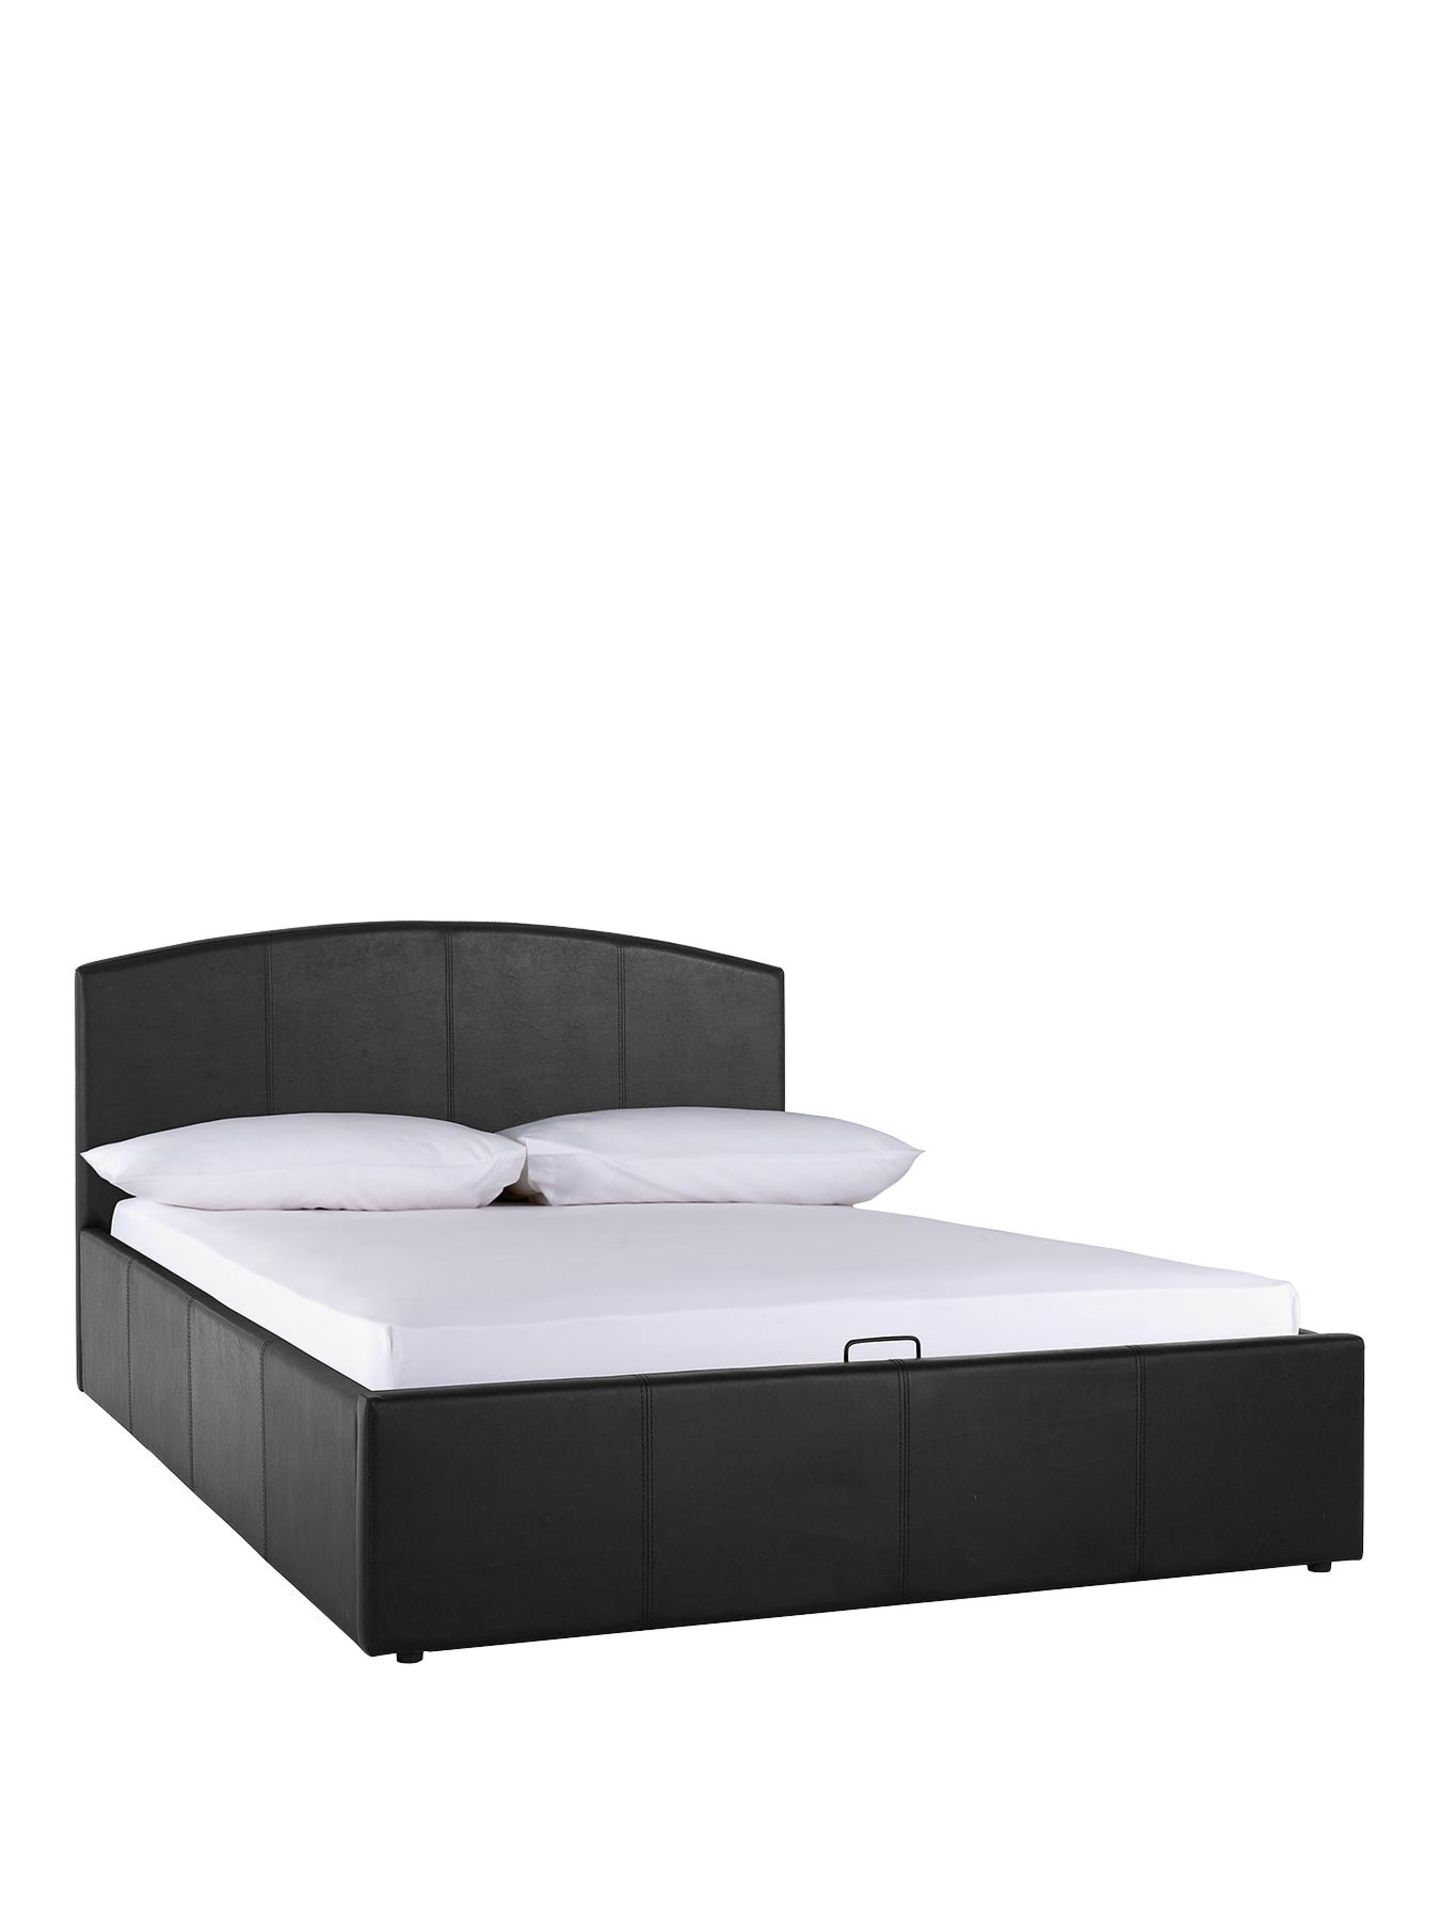 Boxed Item Marston Double Lift-Up Bed [Black] 88X144X202Cm Rrp:£478.0 - Image 2 of 2